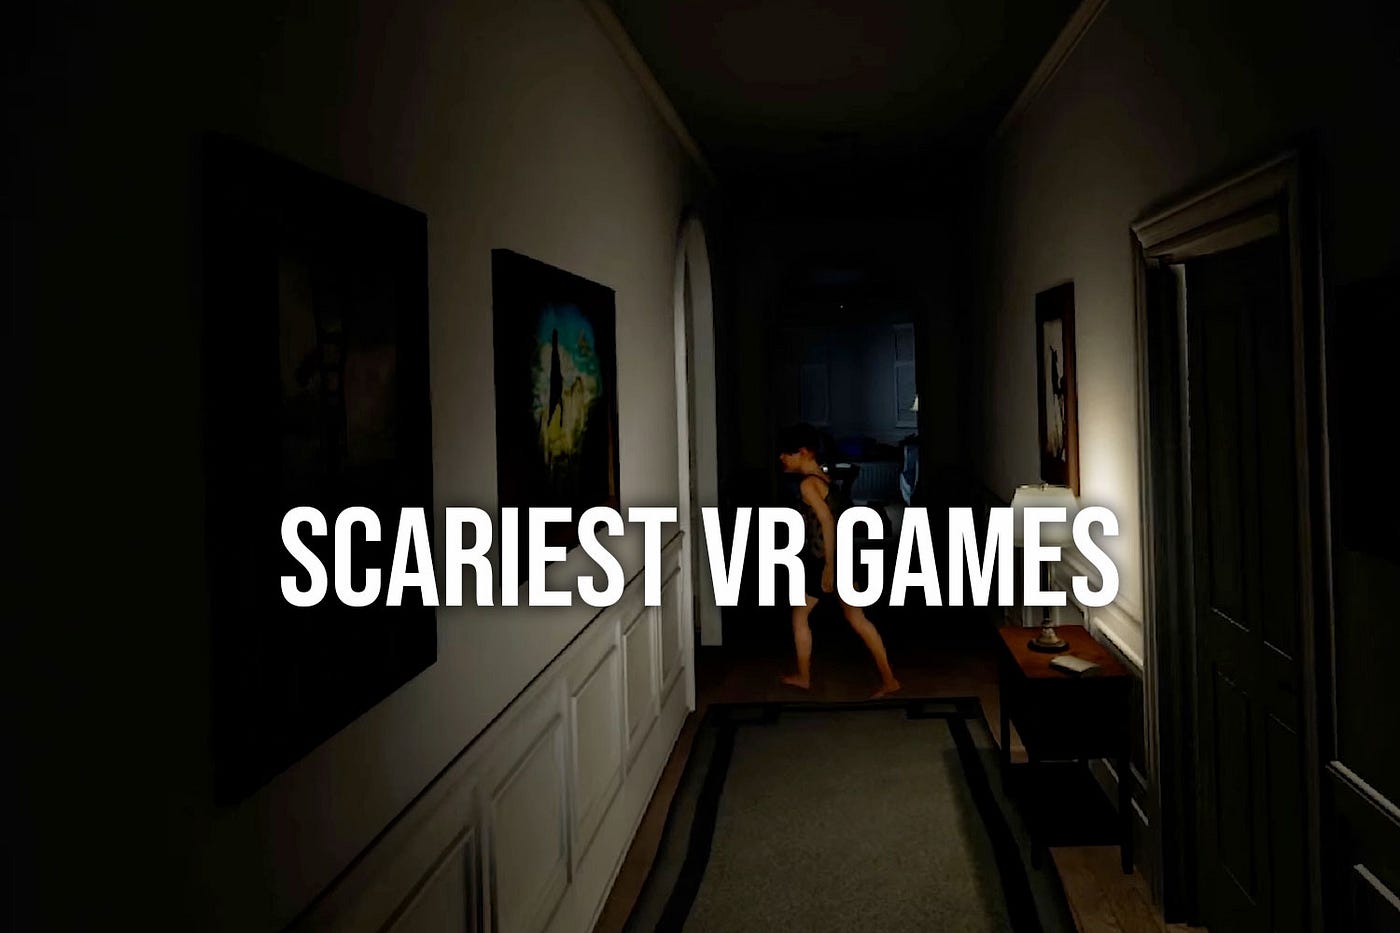 A new indie coop horror game that looks very fun and thrilling to